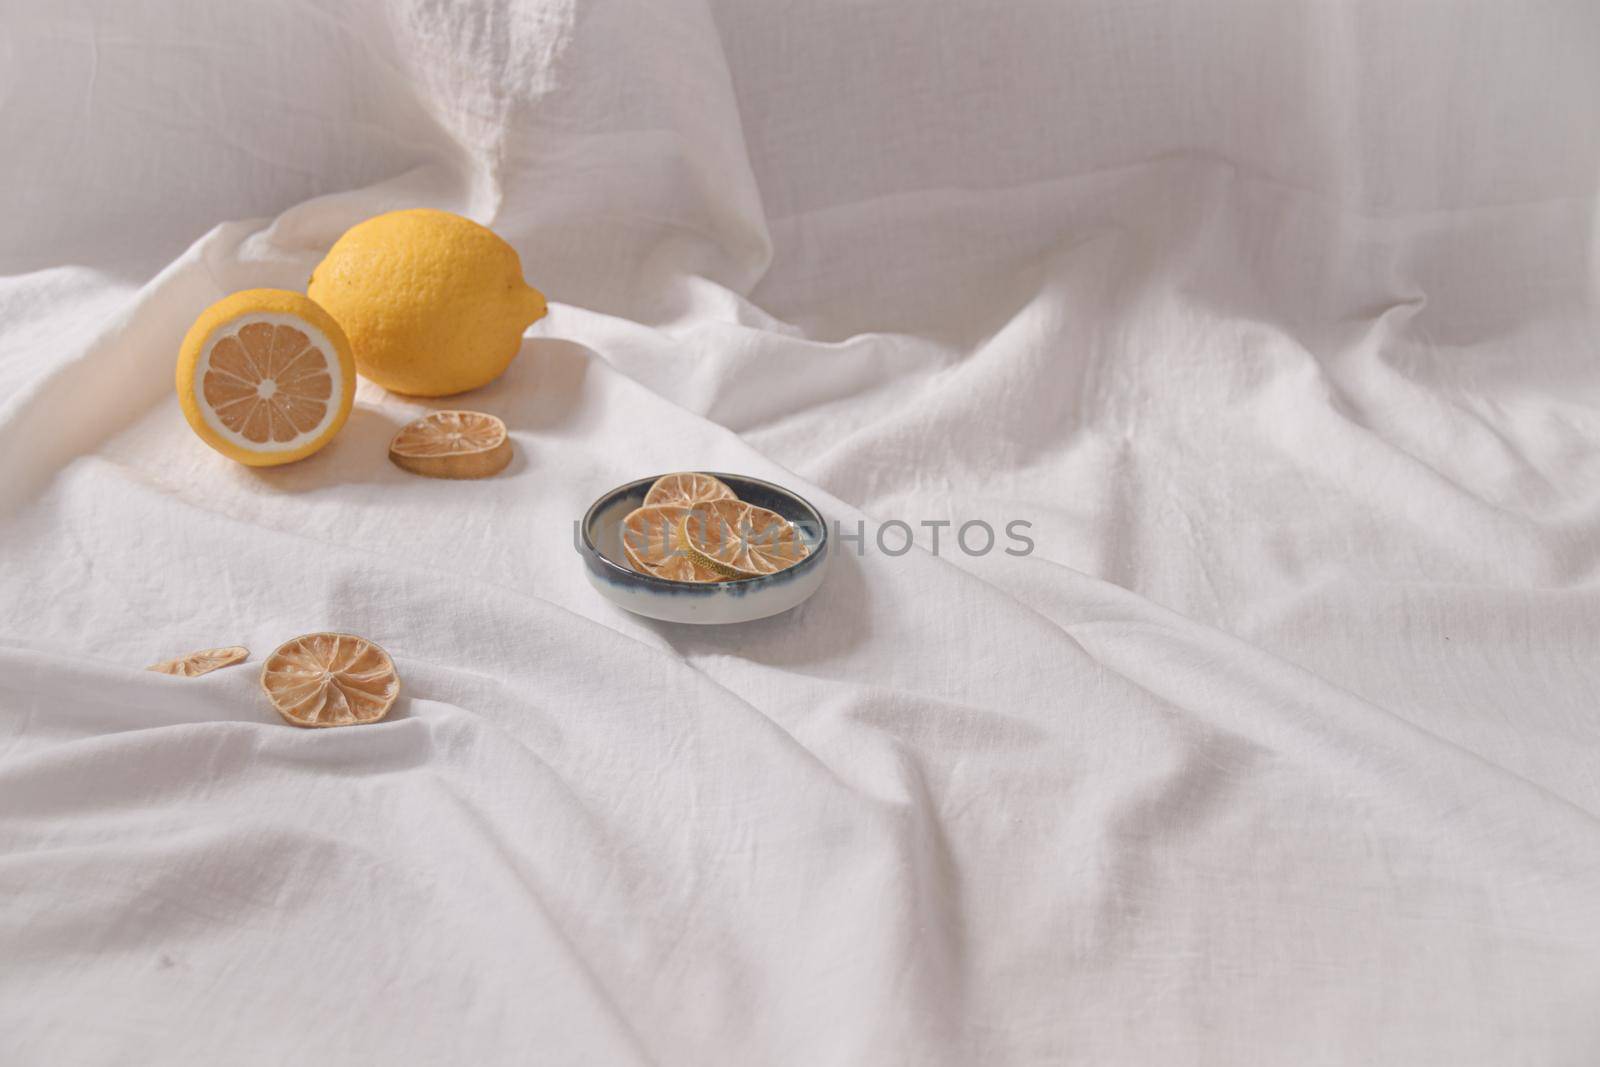 Minimalist still life of fresh and dried lemons by Sonnet15